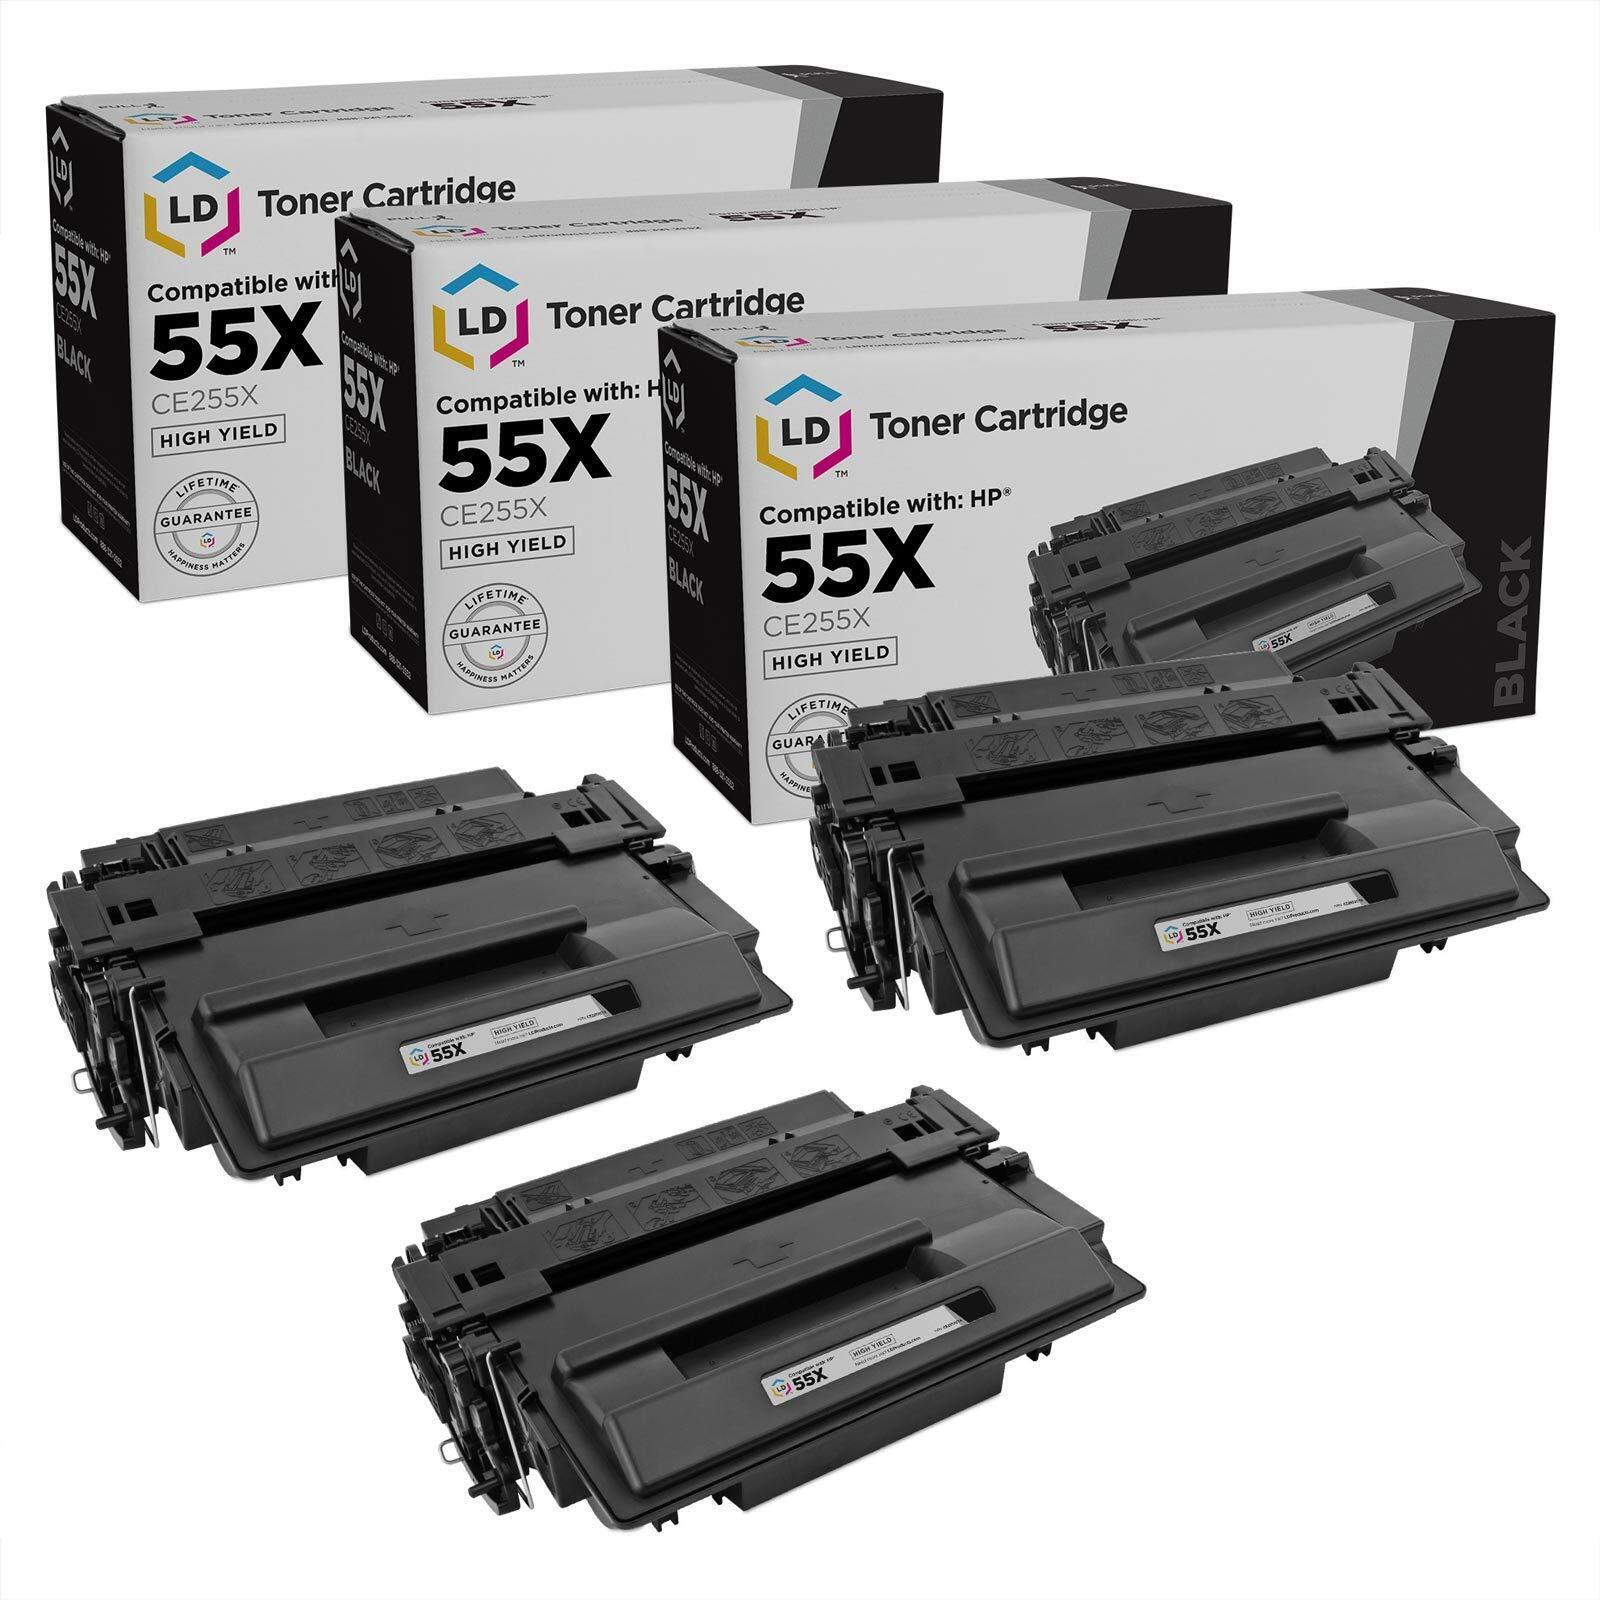 LD Products Replacements for HP 55X 55 CE255X CE255 Toner Cartridge (3PK)